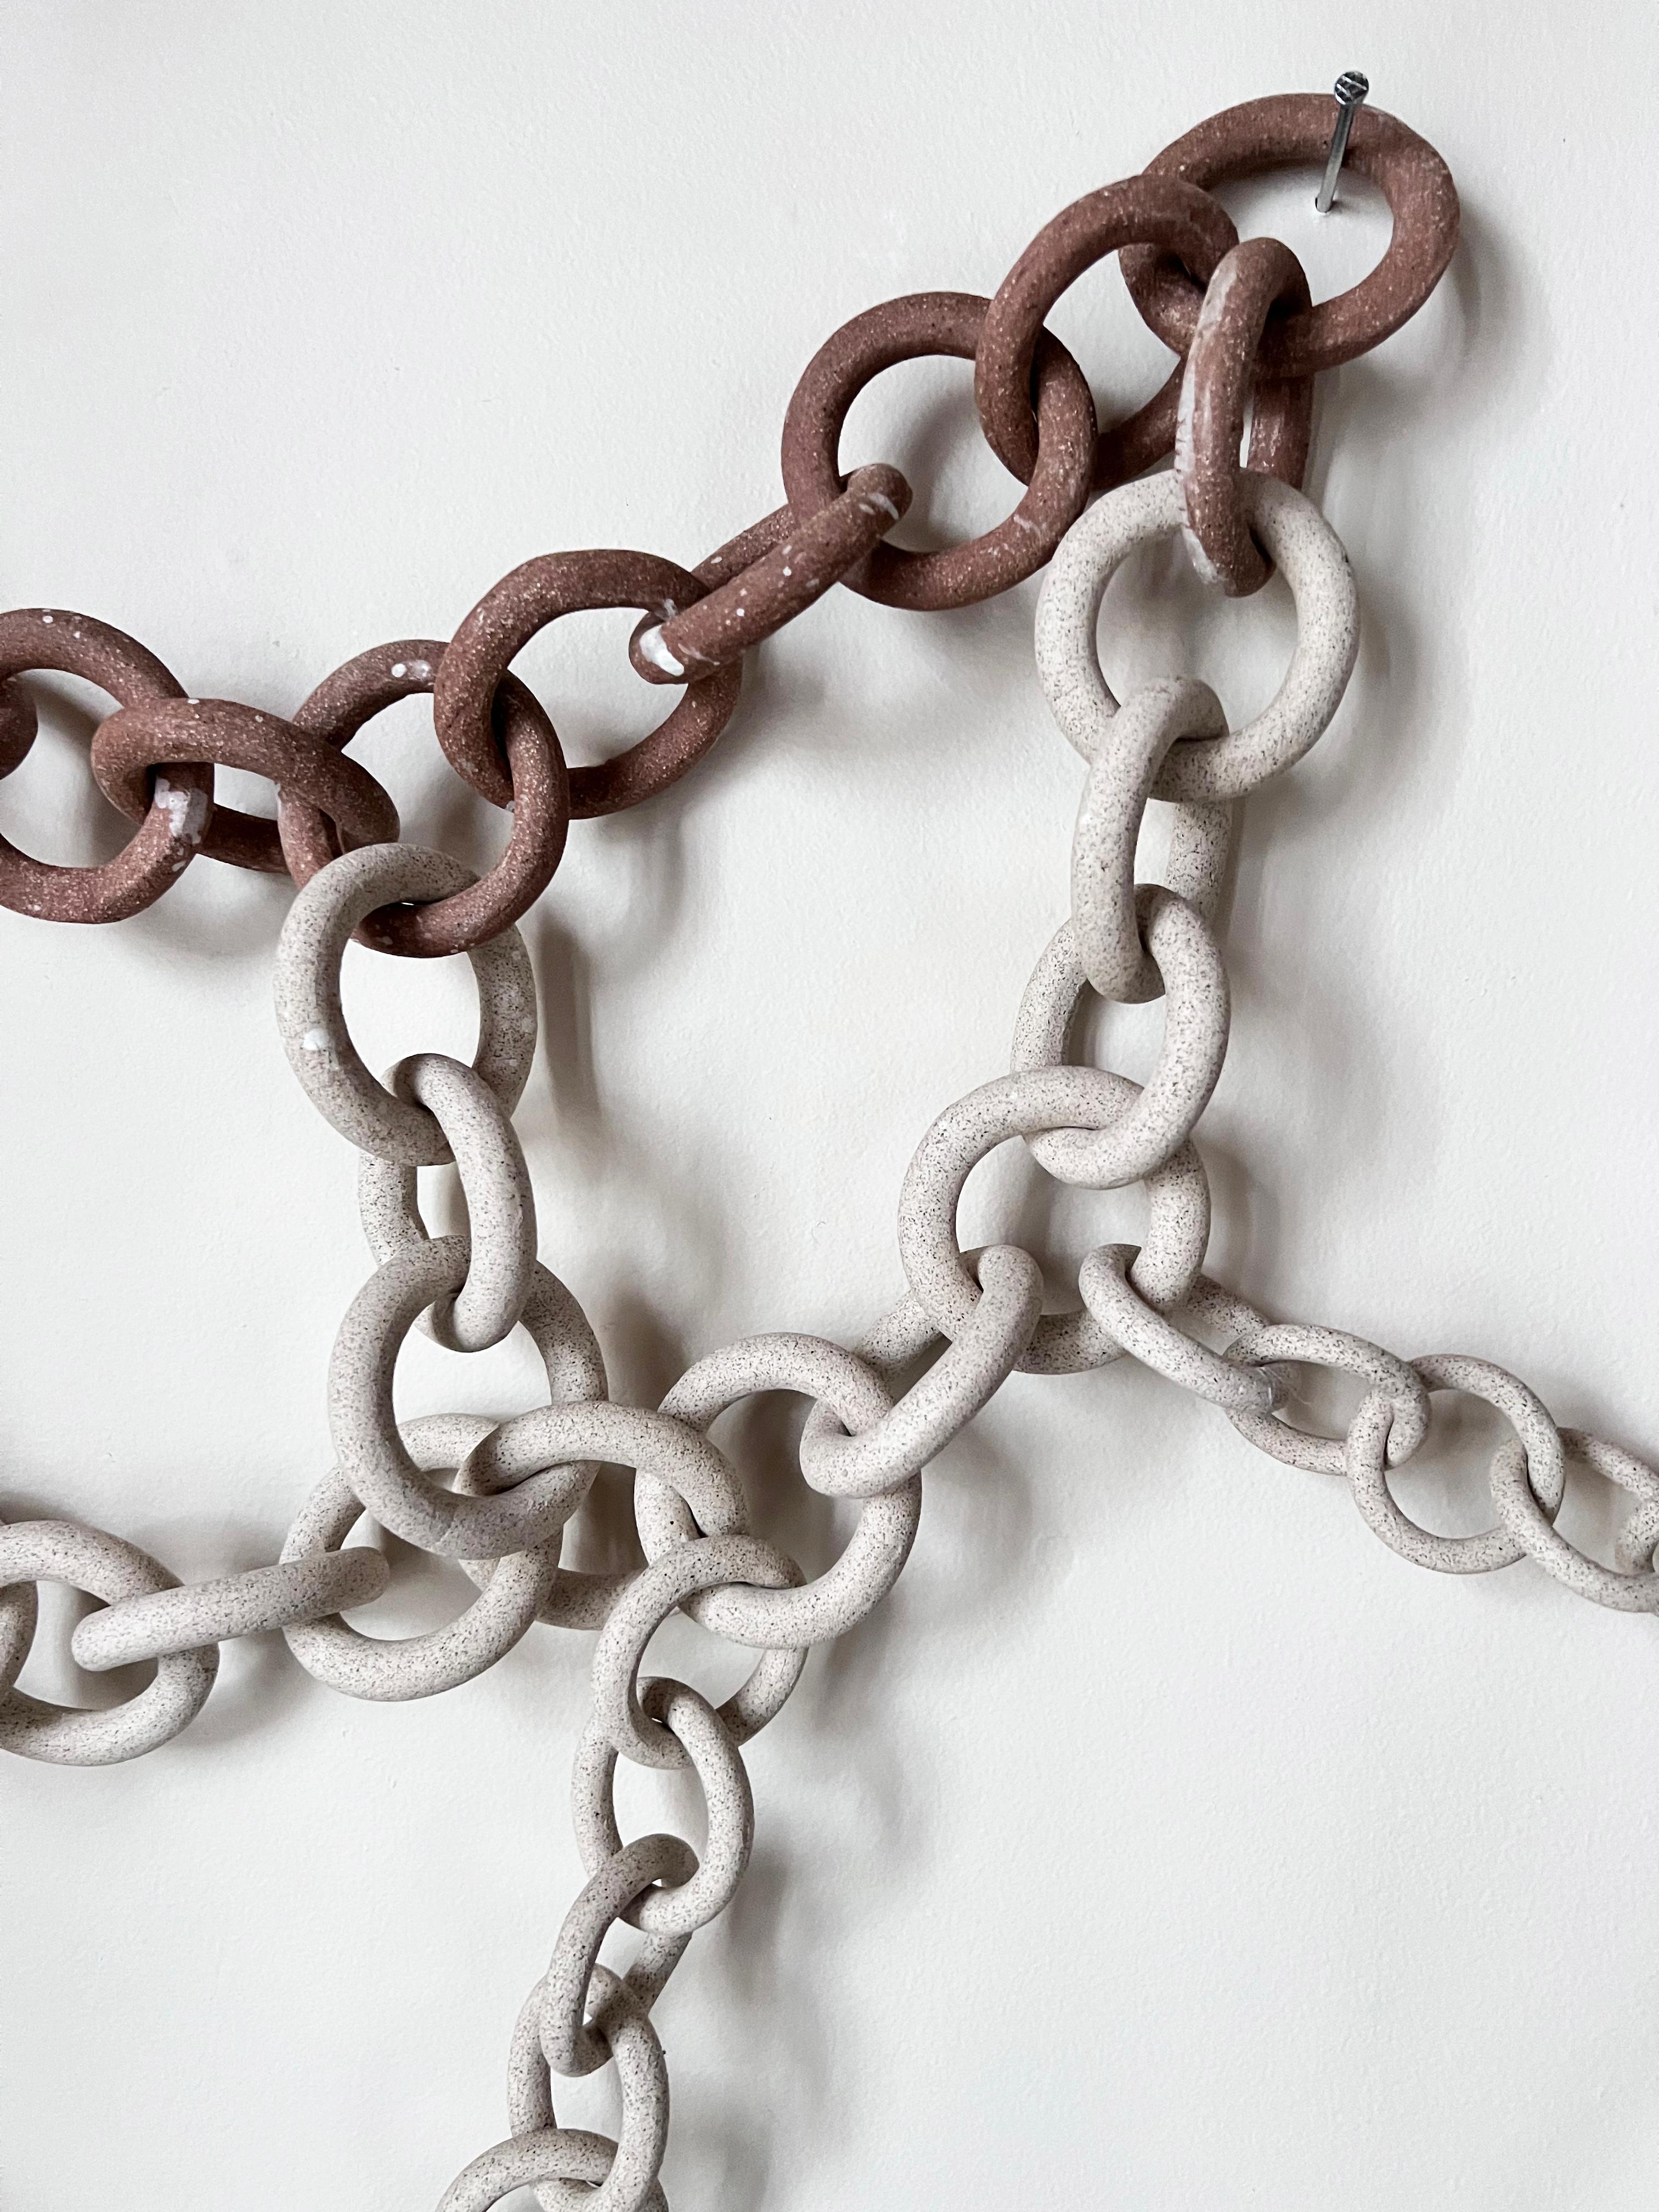 American Ceramic Link Chain Wall Sculpture For Sale